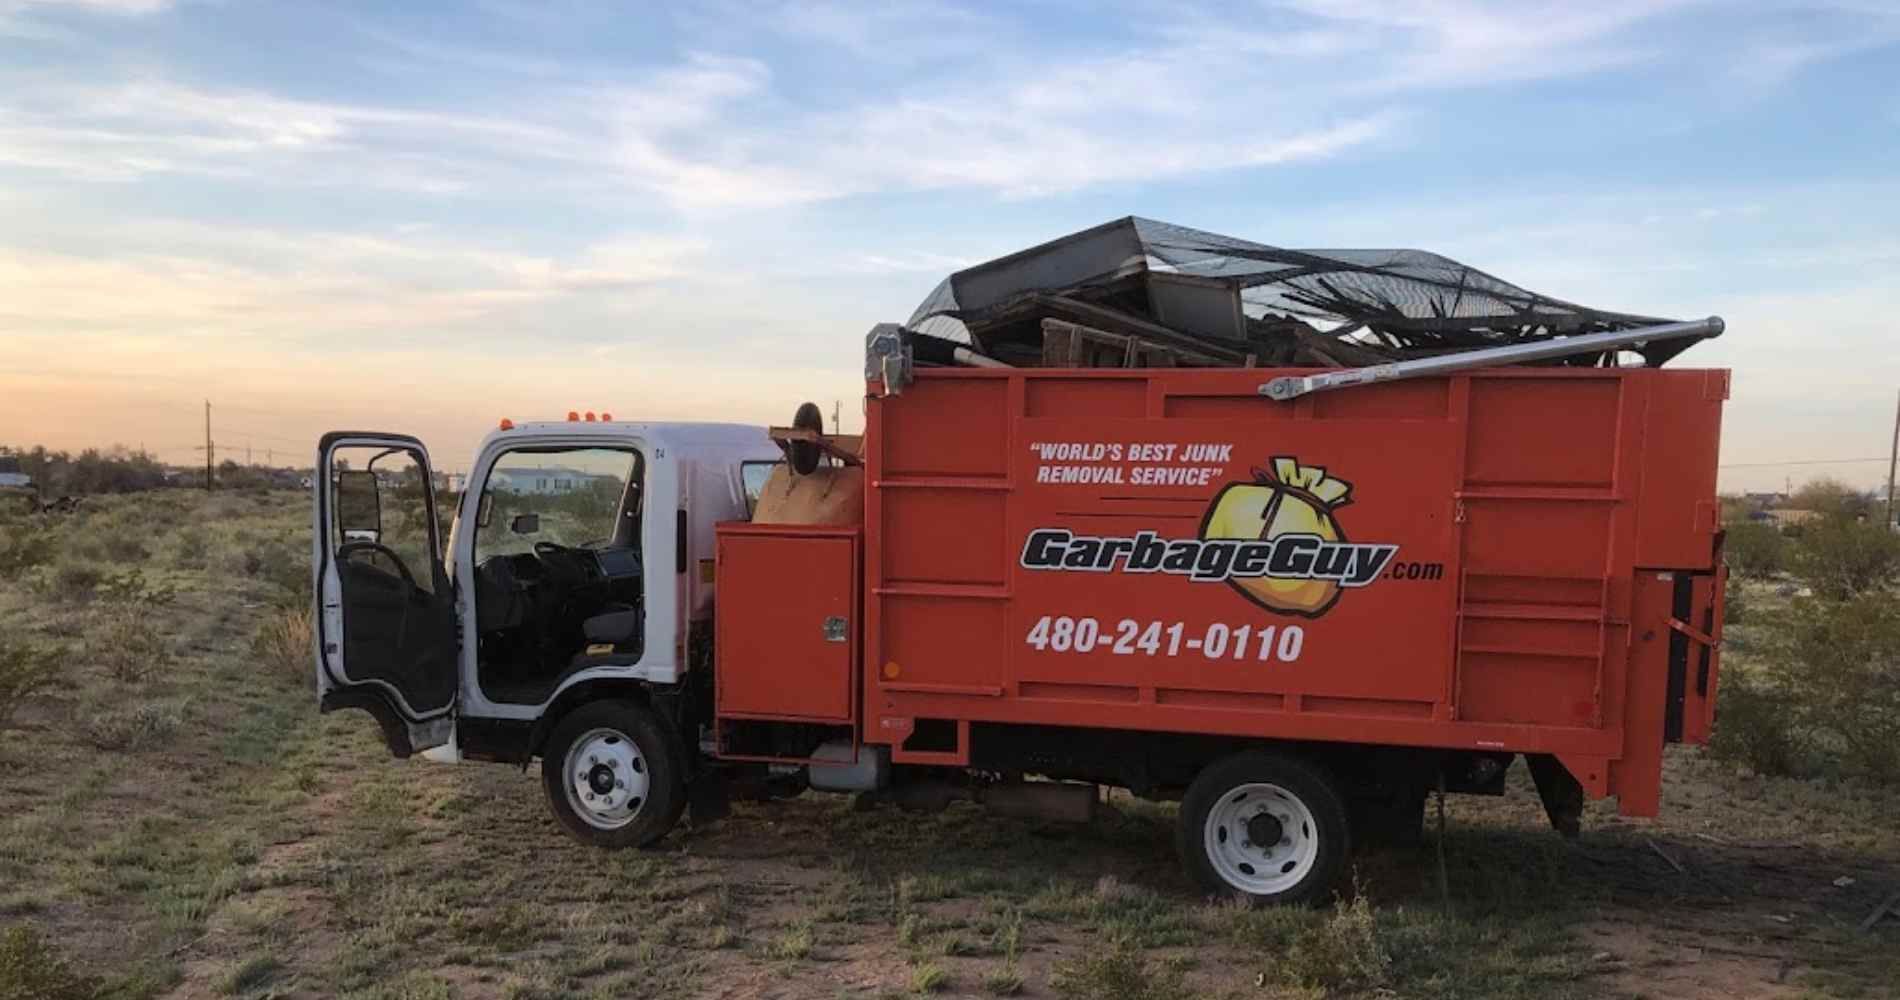 #1 for Junk Removal in Arcadia, AZ with Over 1200 5-Star Reviews!